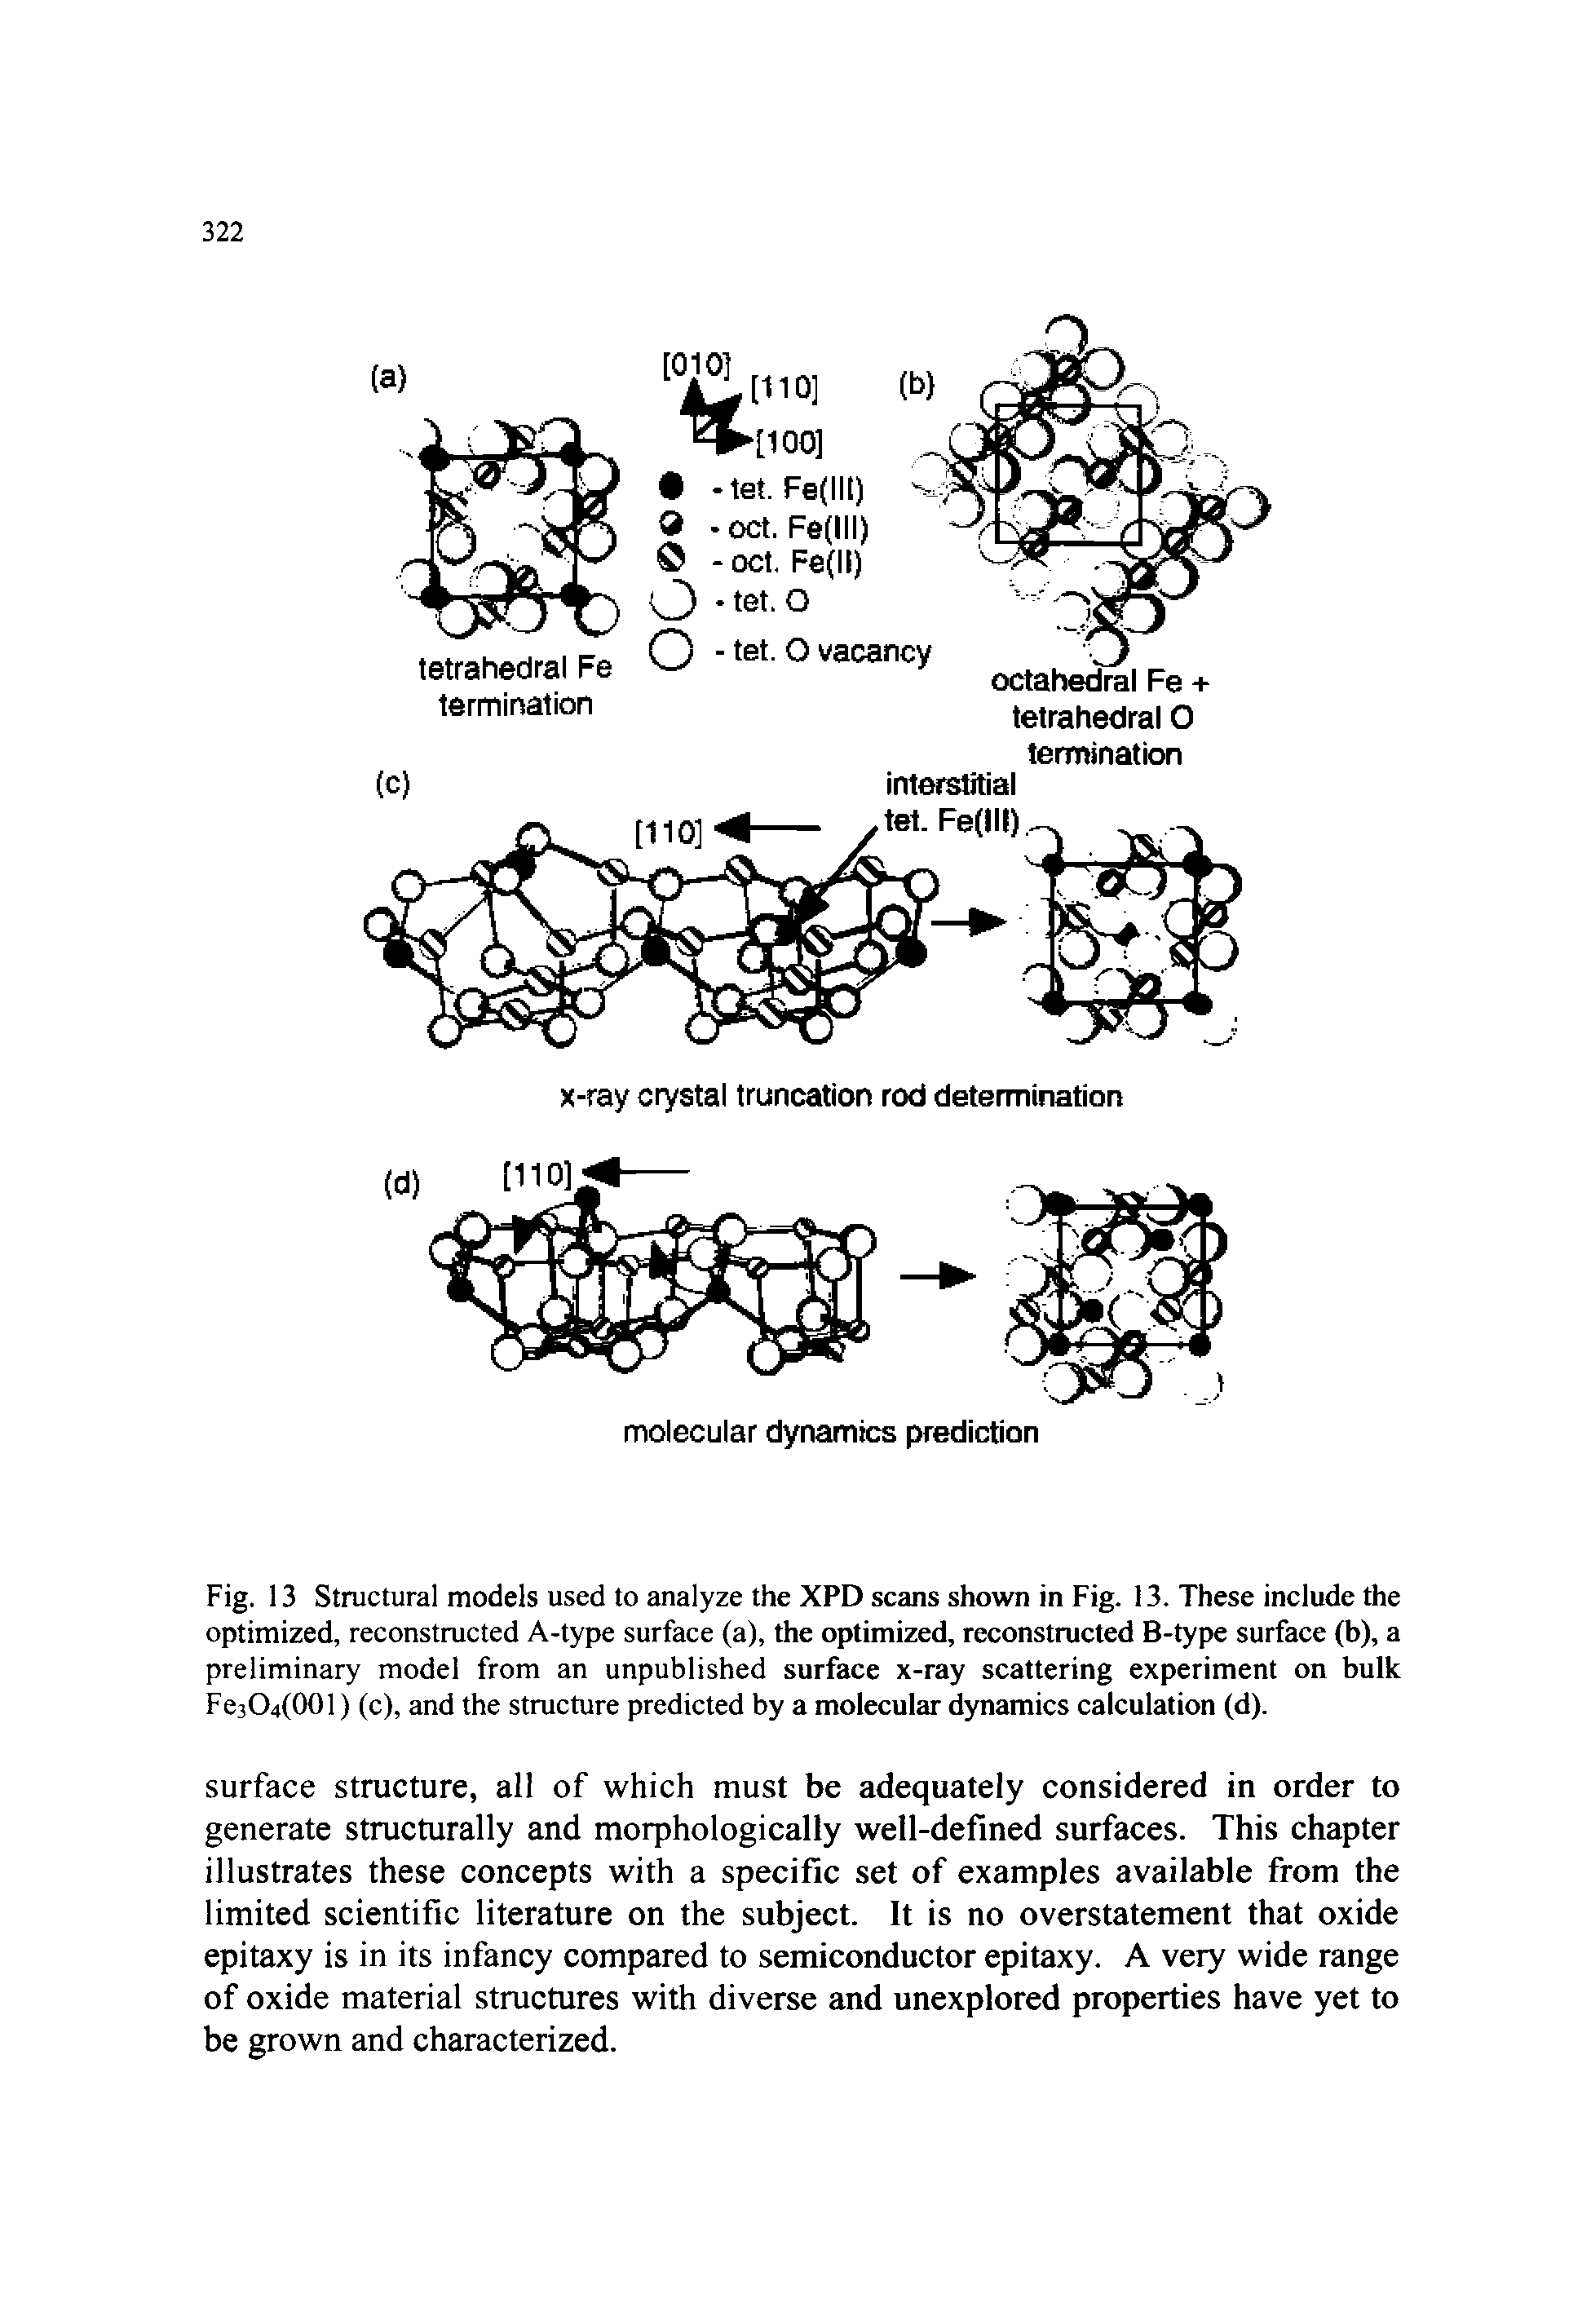 Fig. 13 Structural models used to analyze the XPD scans shown in Fig. 13. These include the optimized, reconstructed A-type surface (a), the optimized, reconstructed B-type surface (b), a preliminary model from an unpublished surface x-ray scattering experiment on bulk Fe304(001) (c), and the structure predicted by a molecular dynamics calculation (d).